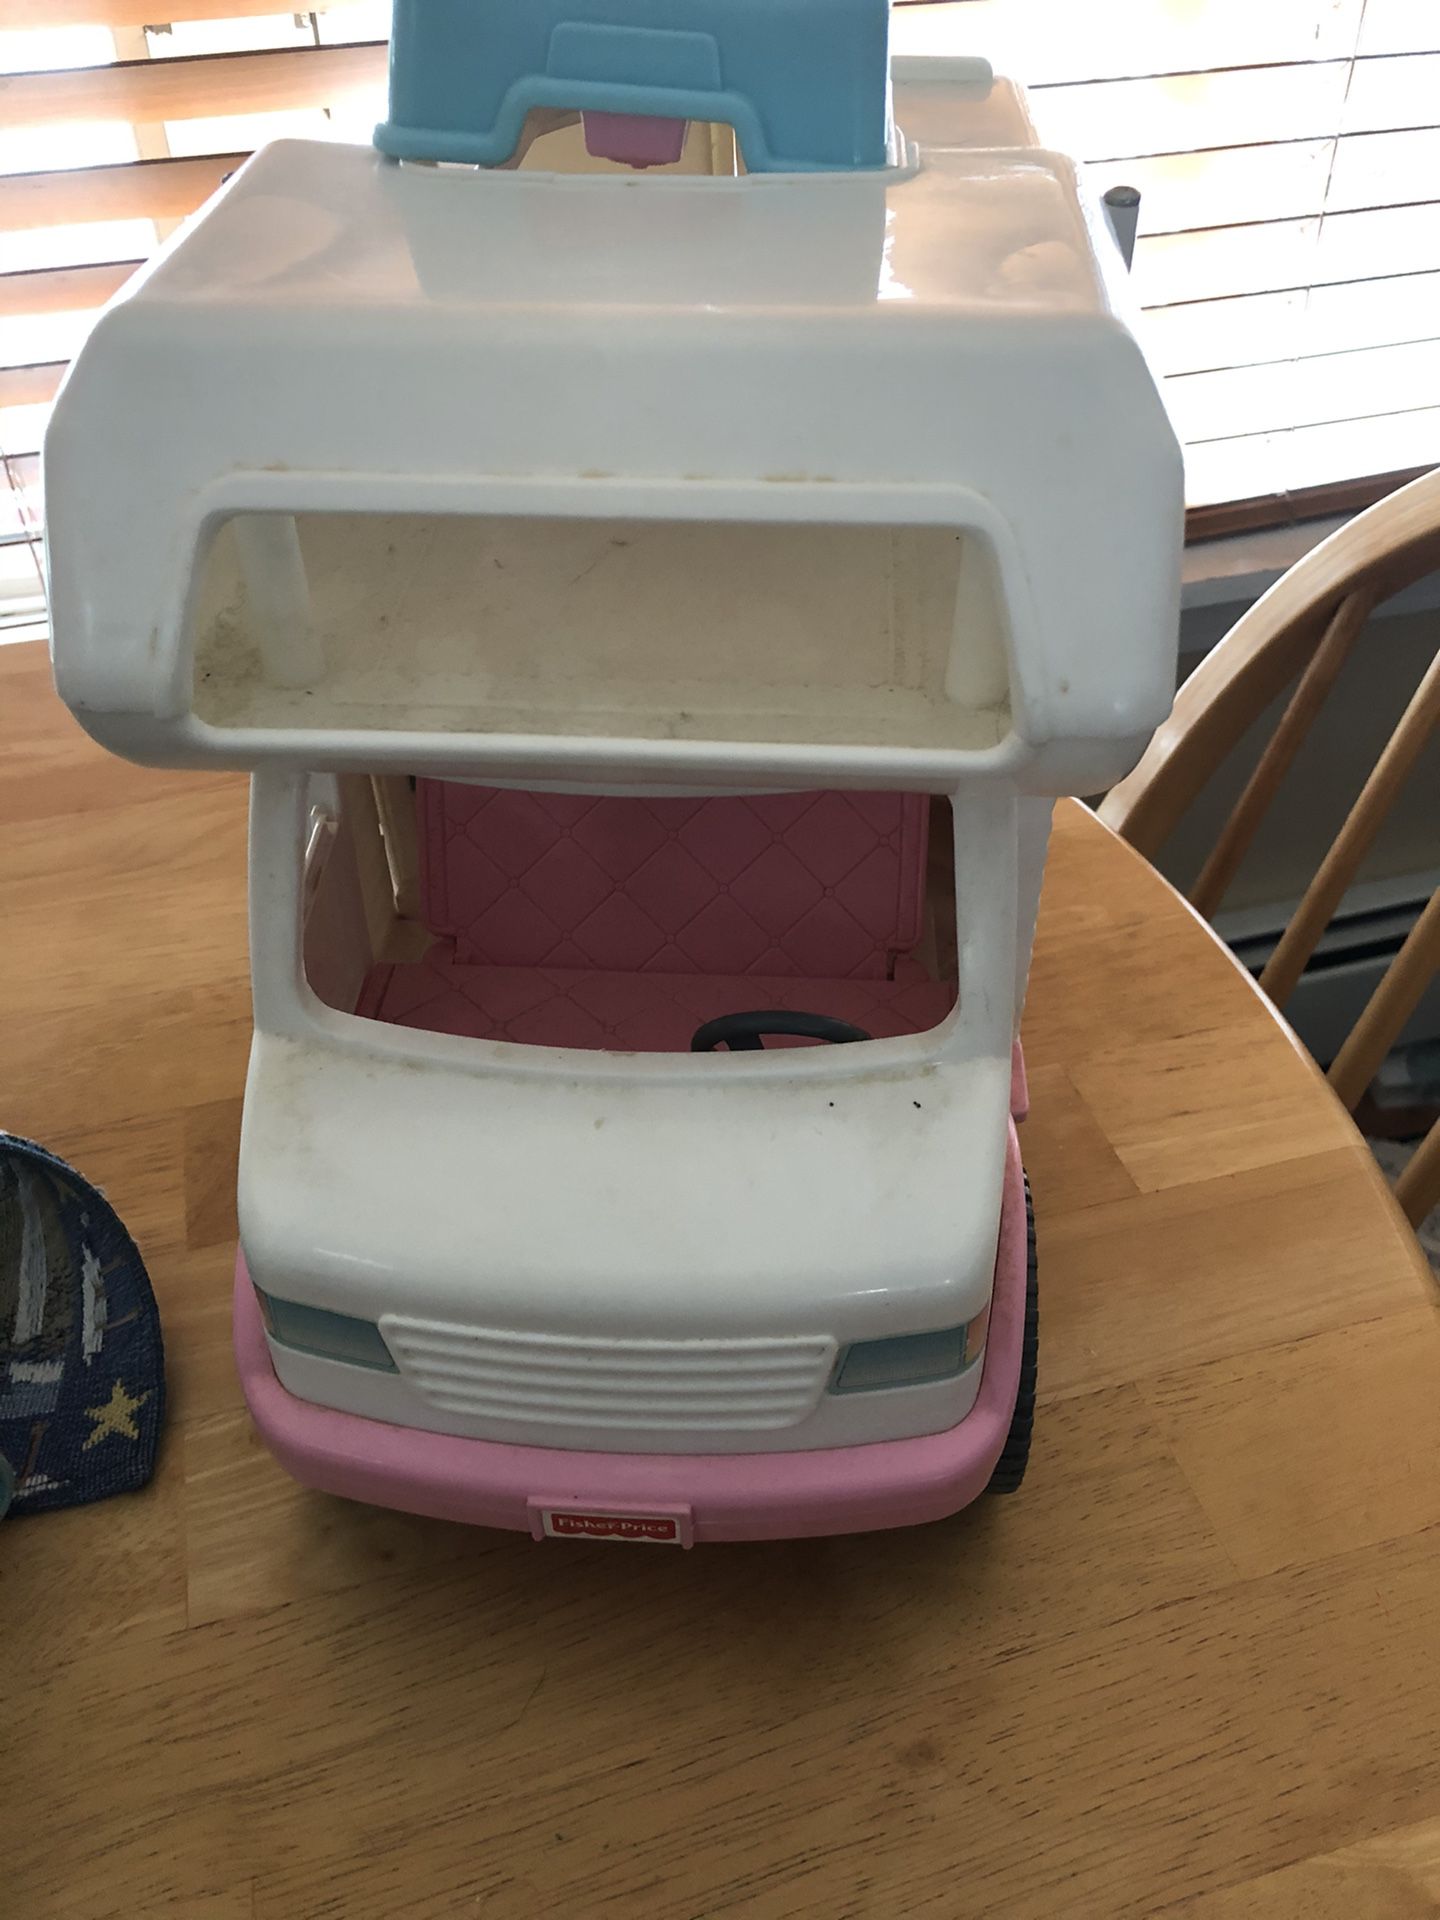 Barbie Pop up RV with Loving Family figures